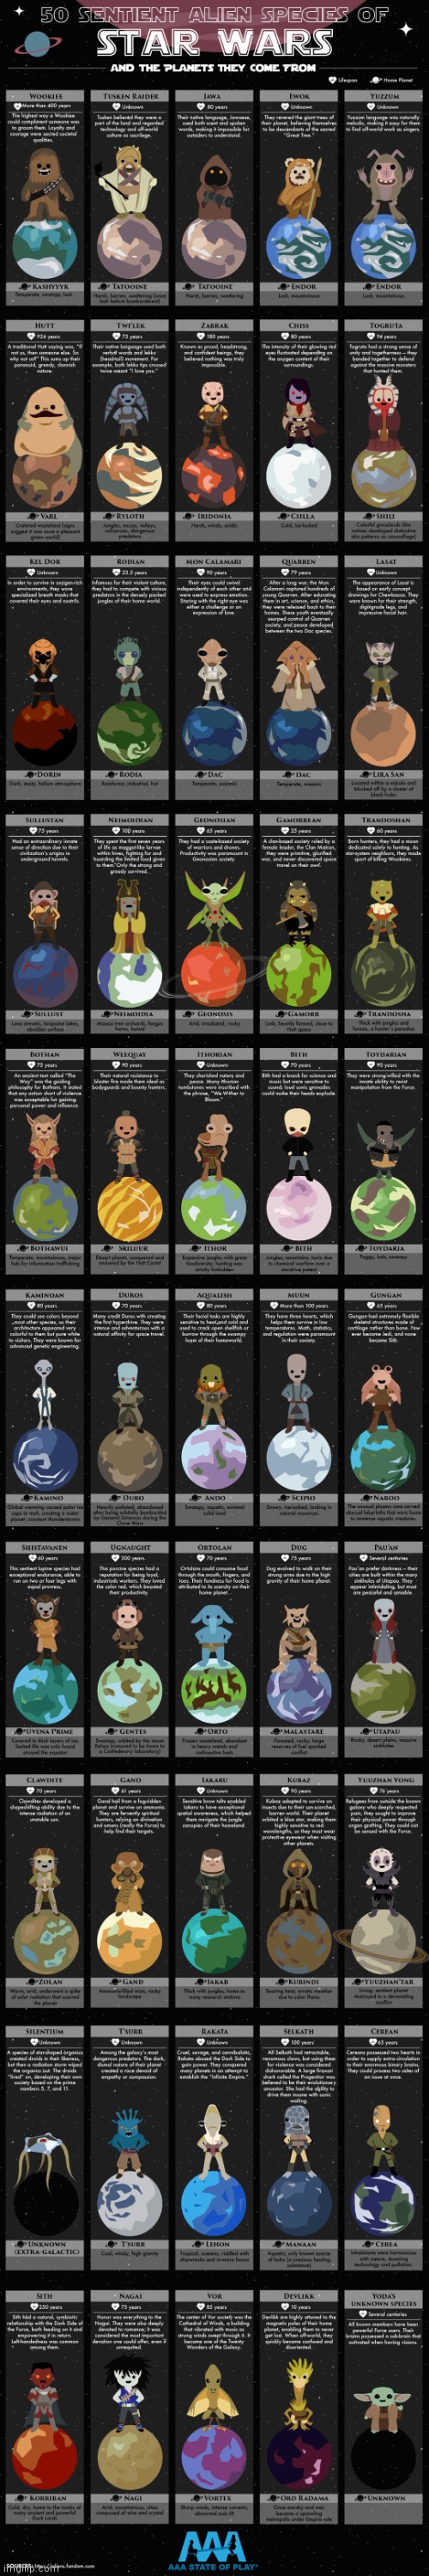 50 SENTIENT ALIEN SPECIES OF STAR WARS (And The Planets They Come From) [Repost - Not Mine] | image tagged in star wars,infographic,aliens,list,simothefinlandized,repost | made w/ Imgflip meme maker